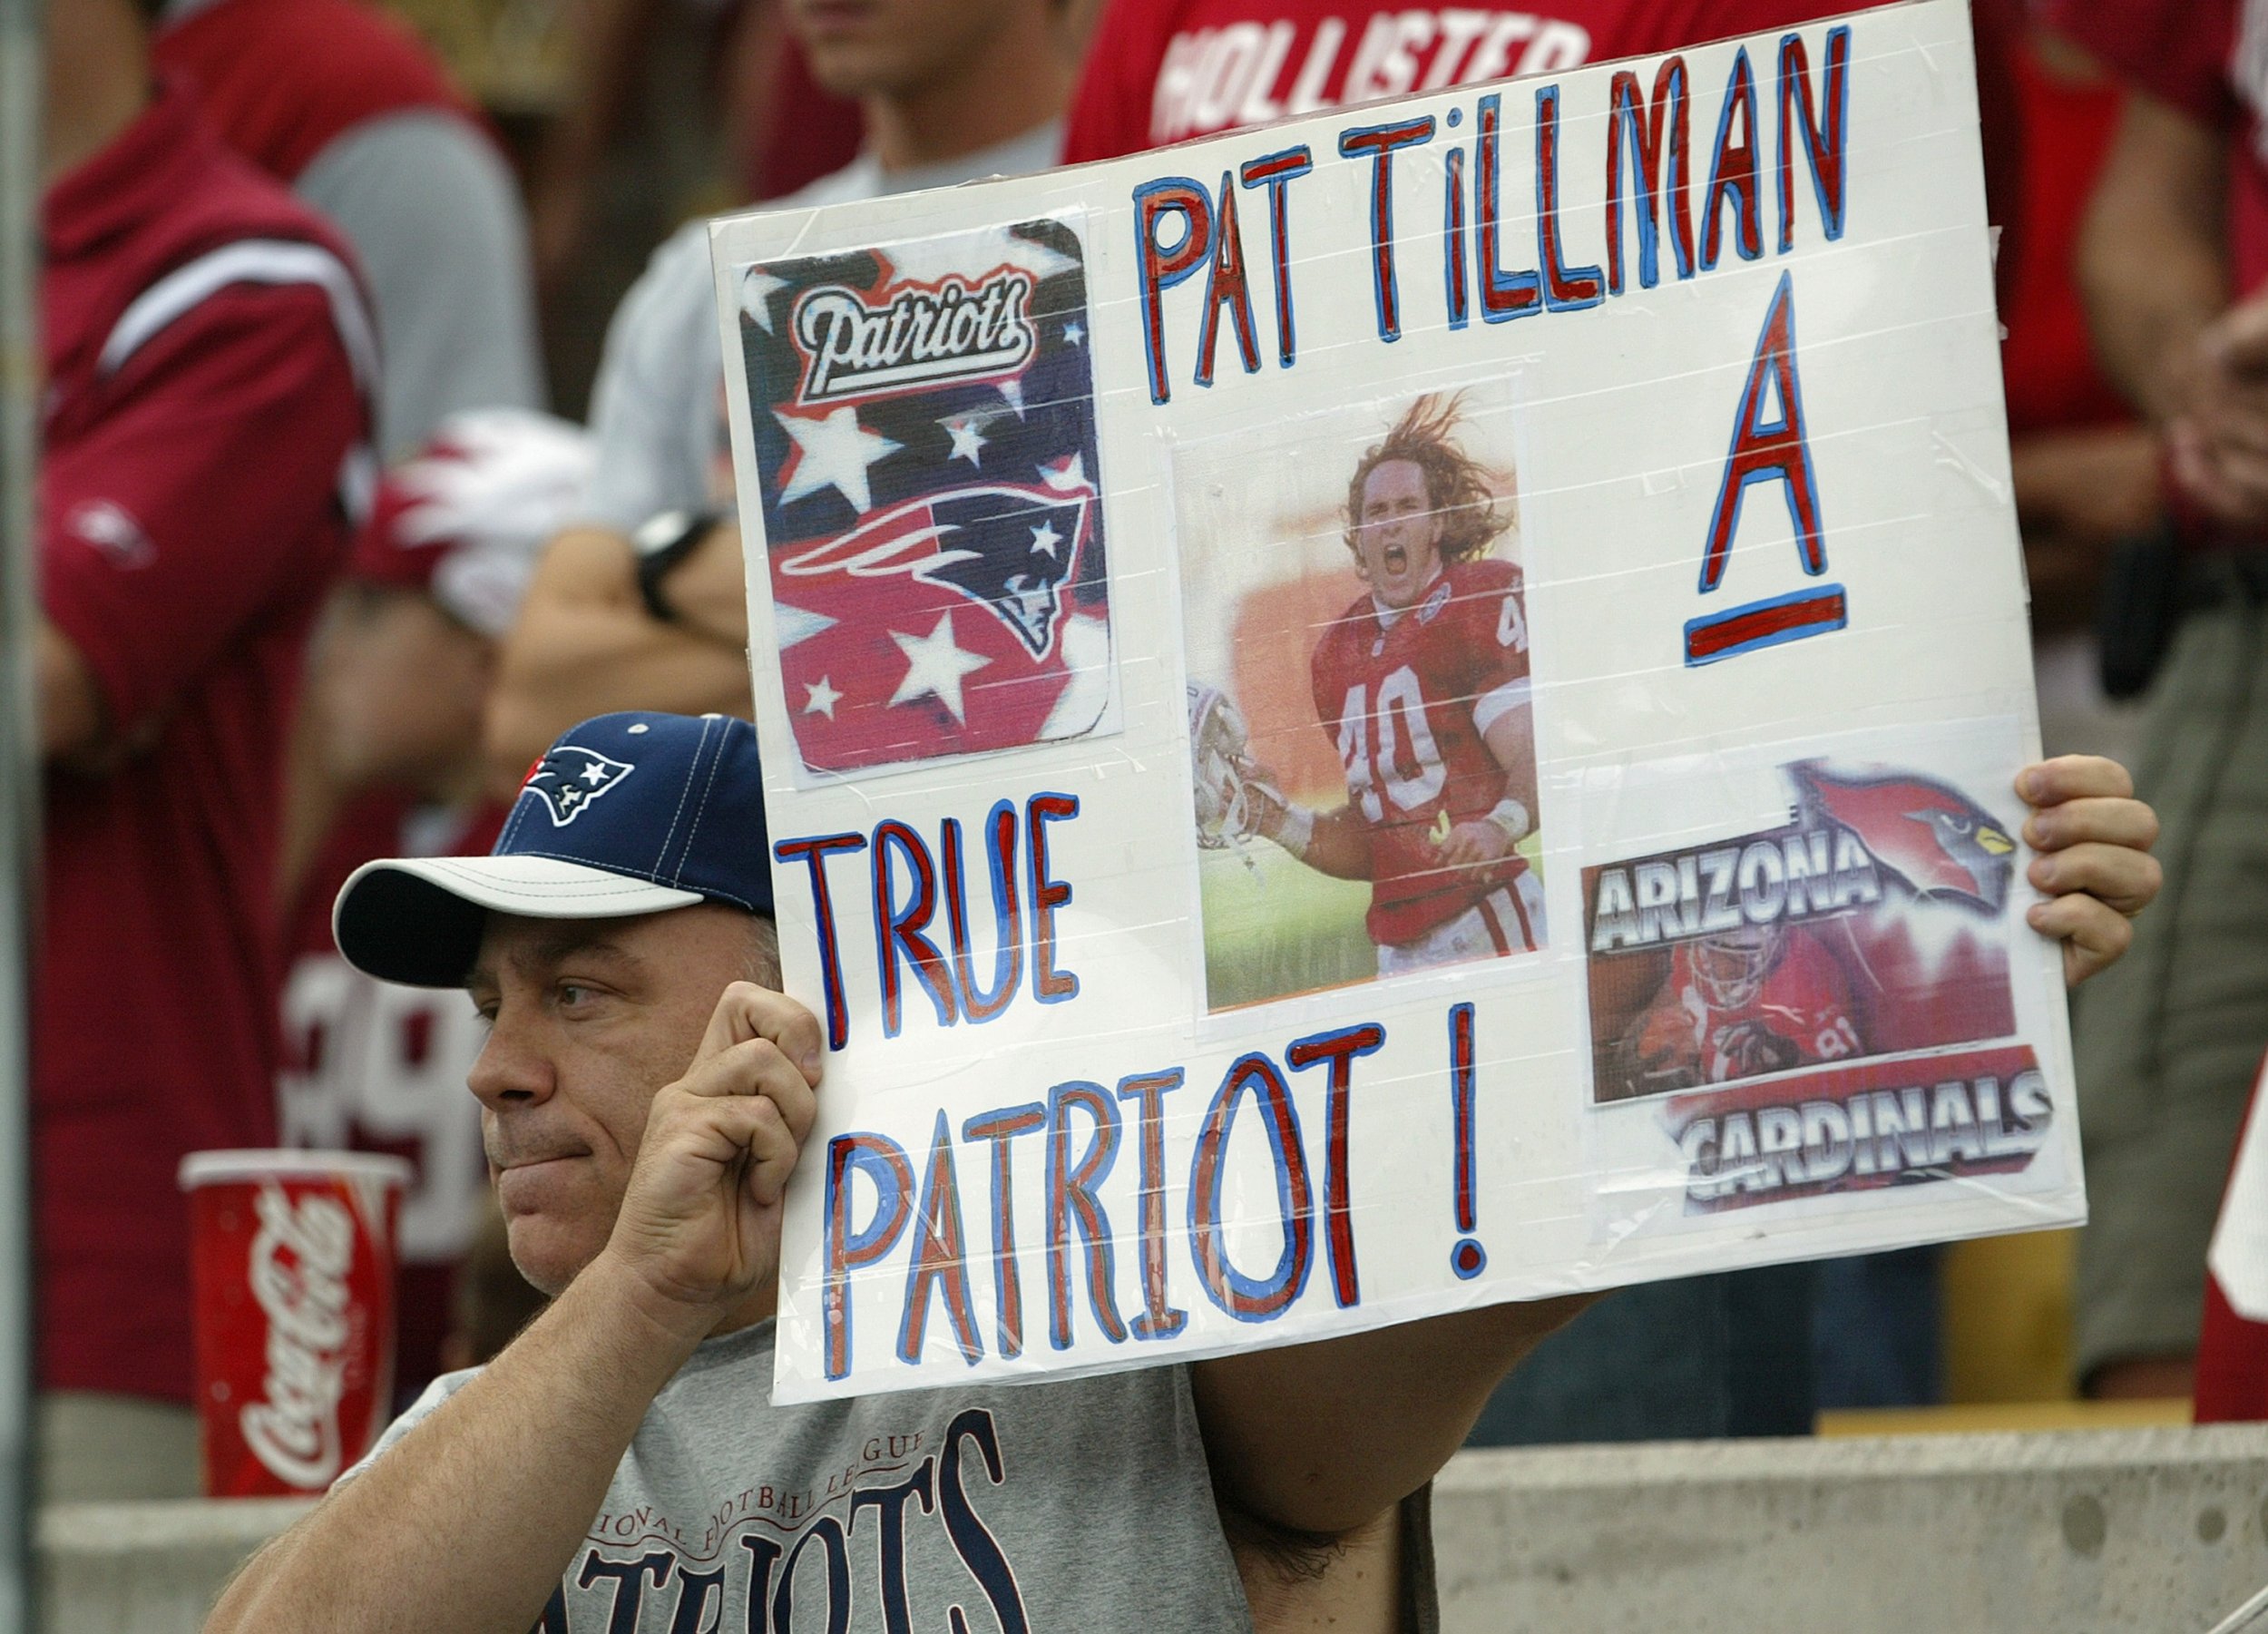 Kaepernick Nike Ad Controversy: Pat Tillman Would Have Been 'First